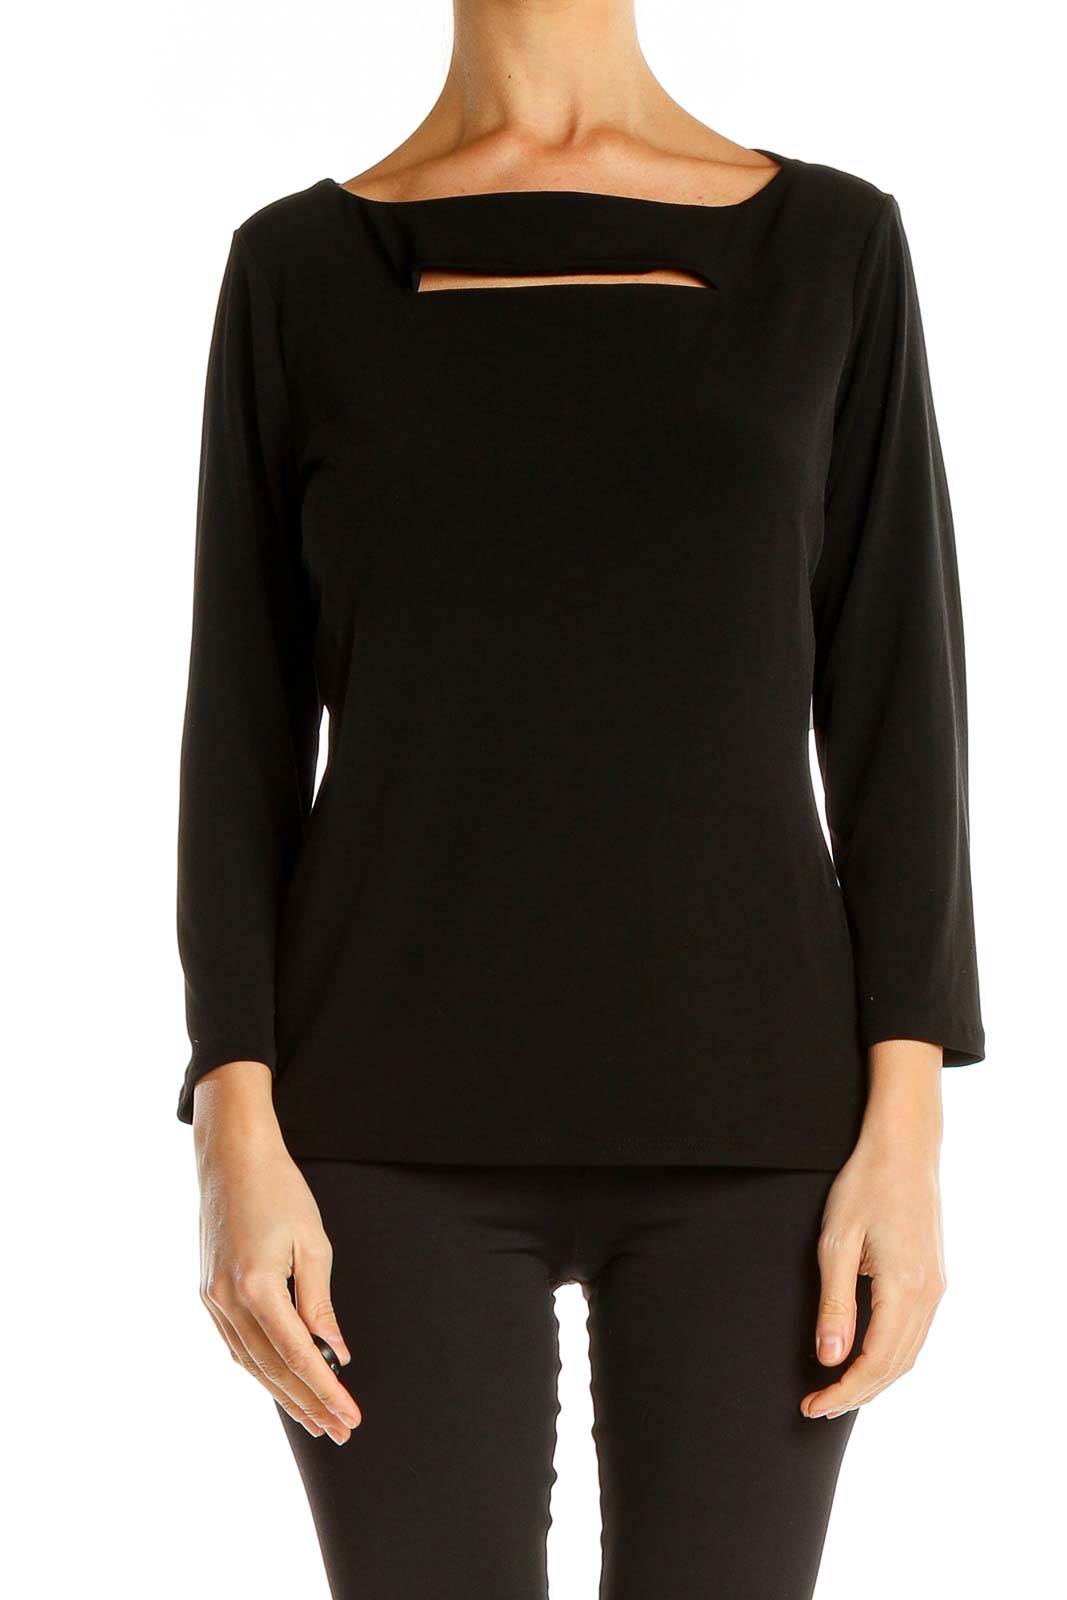 Black All Day Wear Top with Cutout Detail Front